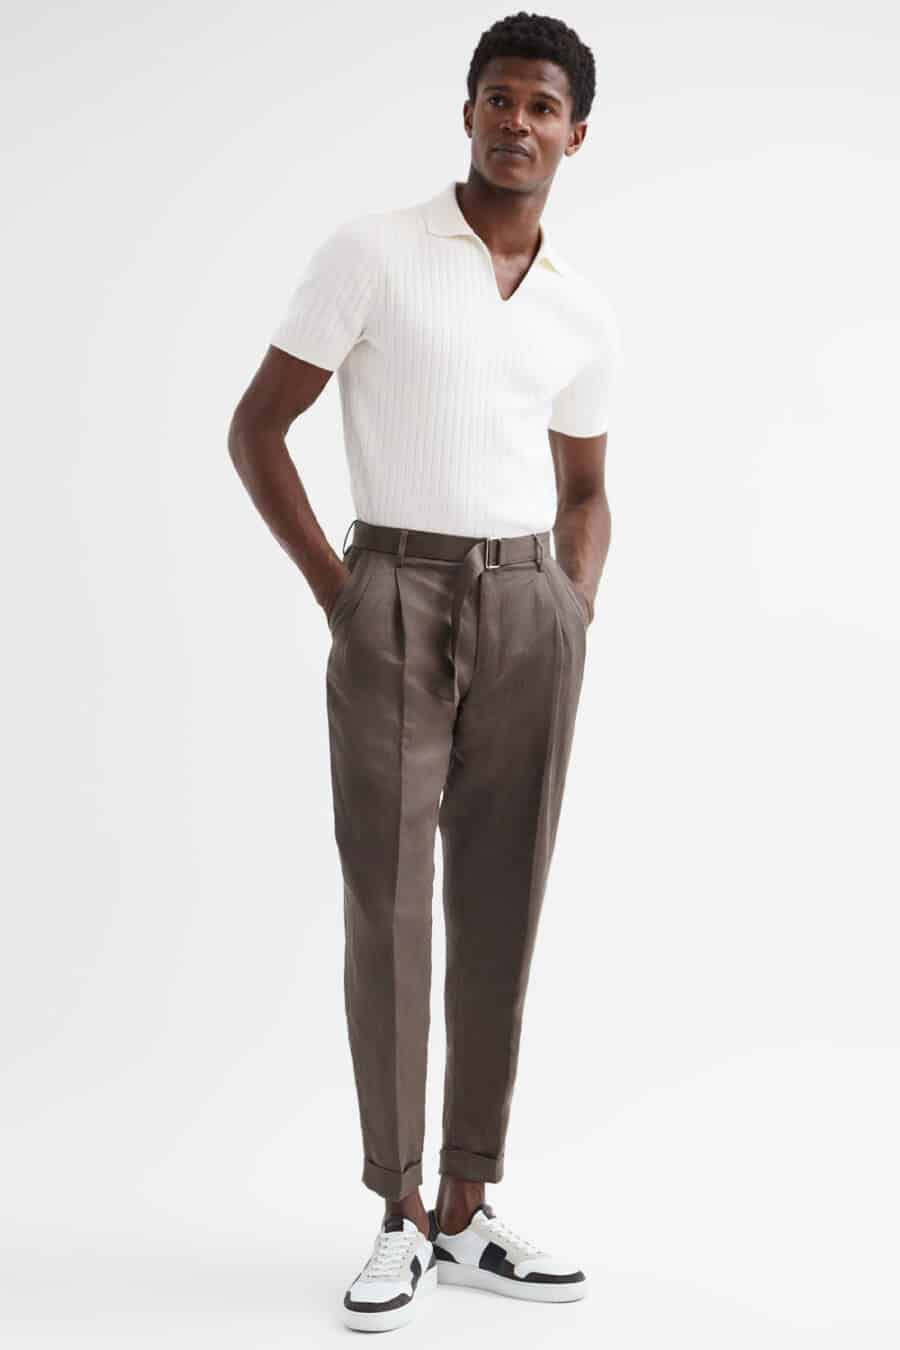 Men's brown pleated trousers, tucked in white polo shirt and white sneakers outfit